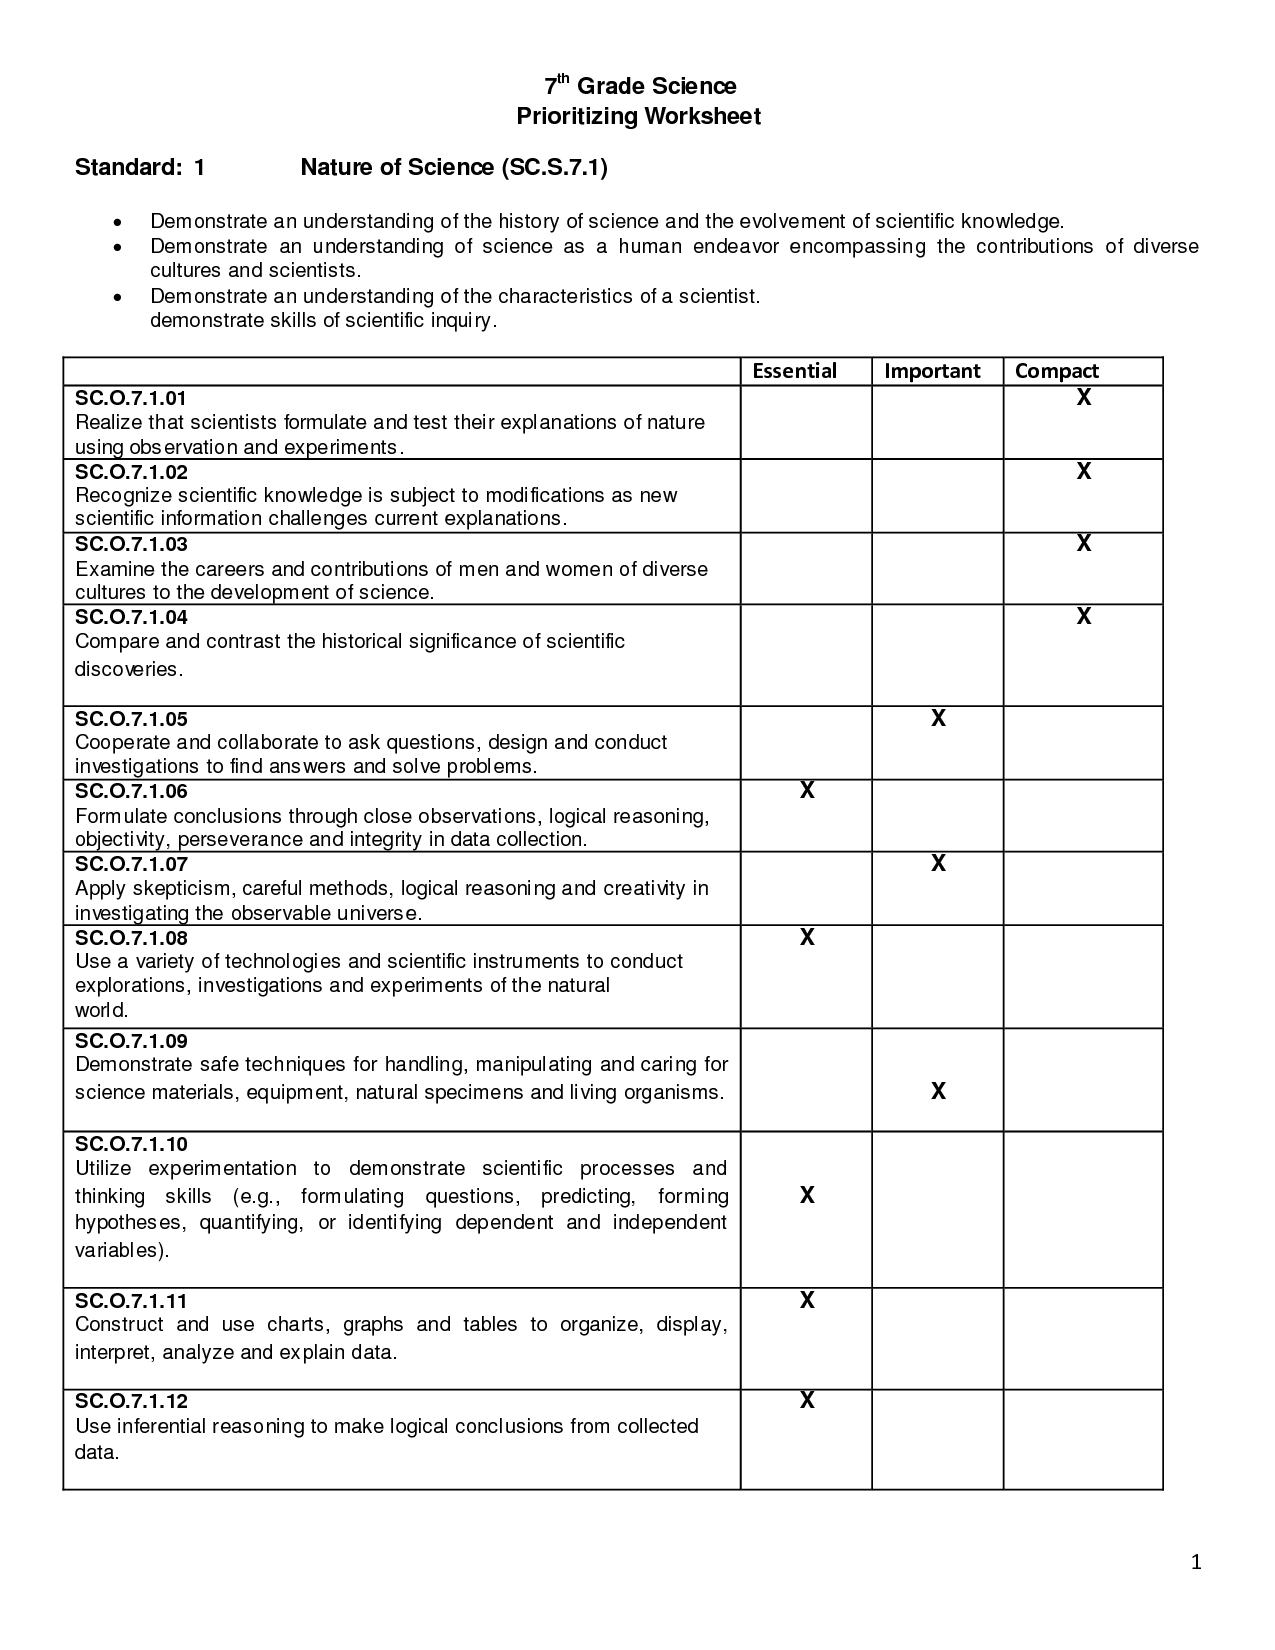 7th Grade Vocabulary Worksheets Printable 17 Best Images Of 7th Grade Vocabulary Worksheets 7th We Have Lots Of Activity Sheets About Many Different Topics Devadesignstudio